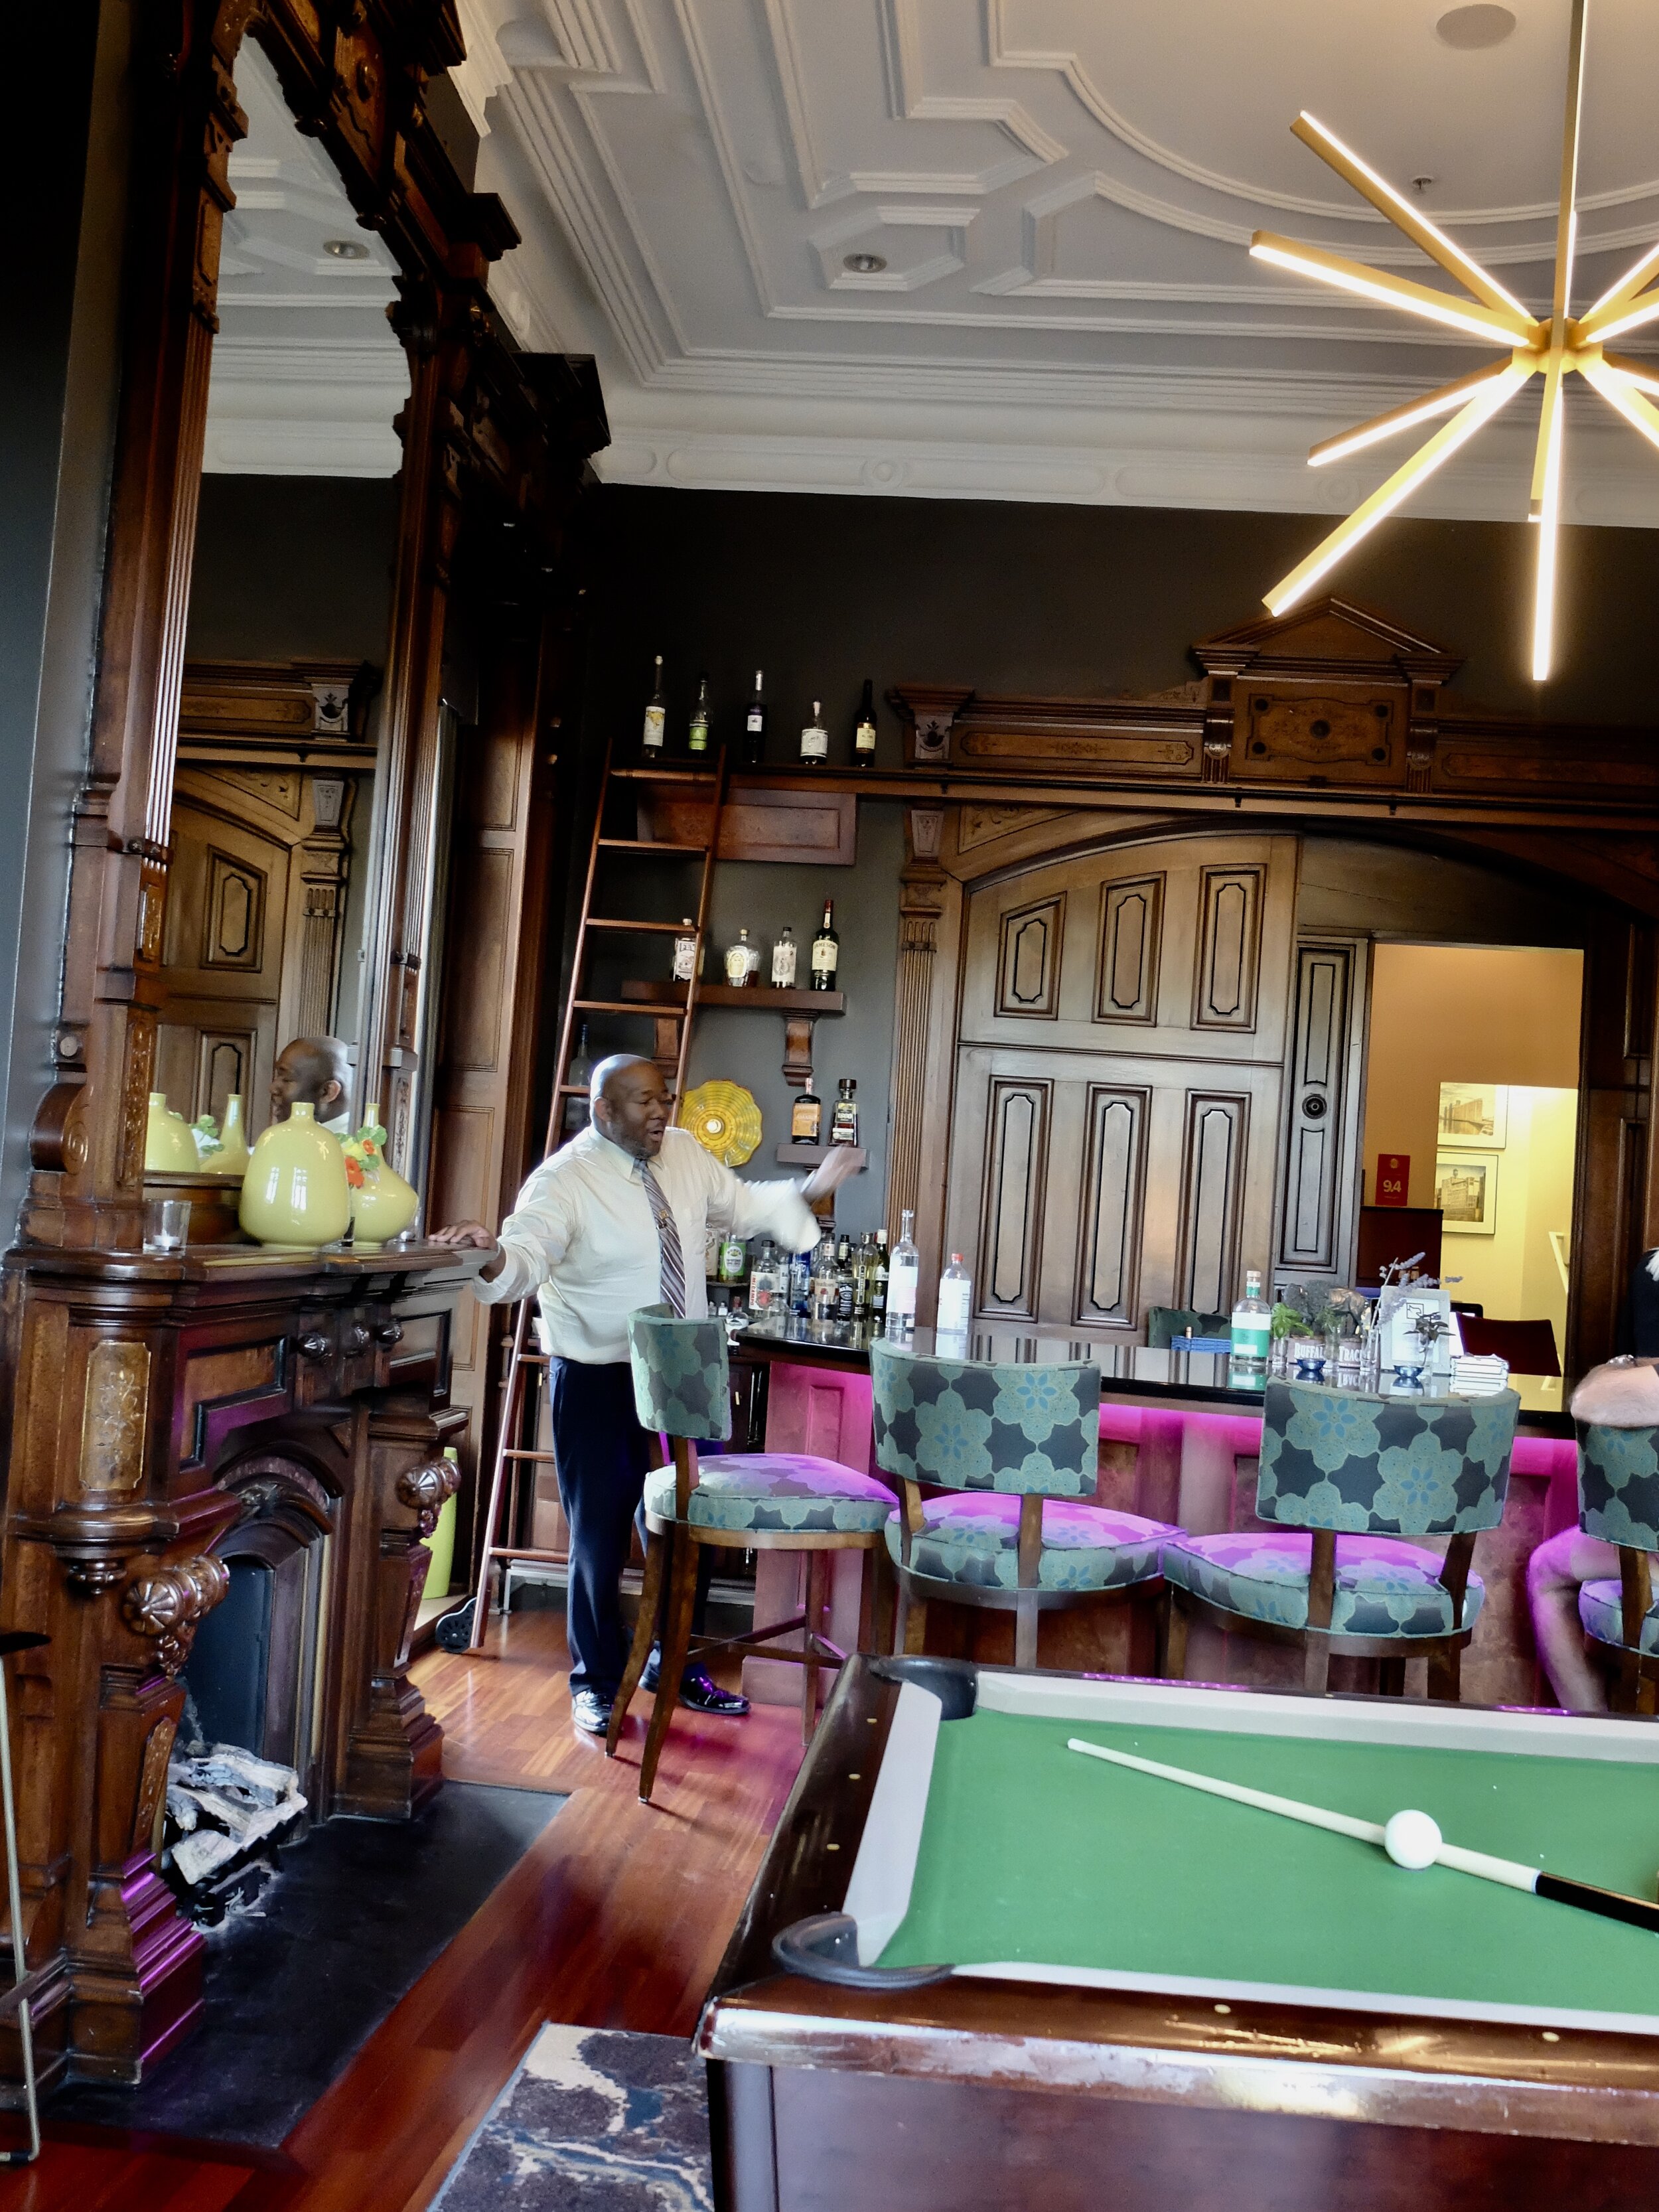 The front desk manager, Jevon, enjoyed filling us in on the history of the Mansion &amp; facts about Buffalo.  After the break, I got off a few bank shots on that pool table.